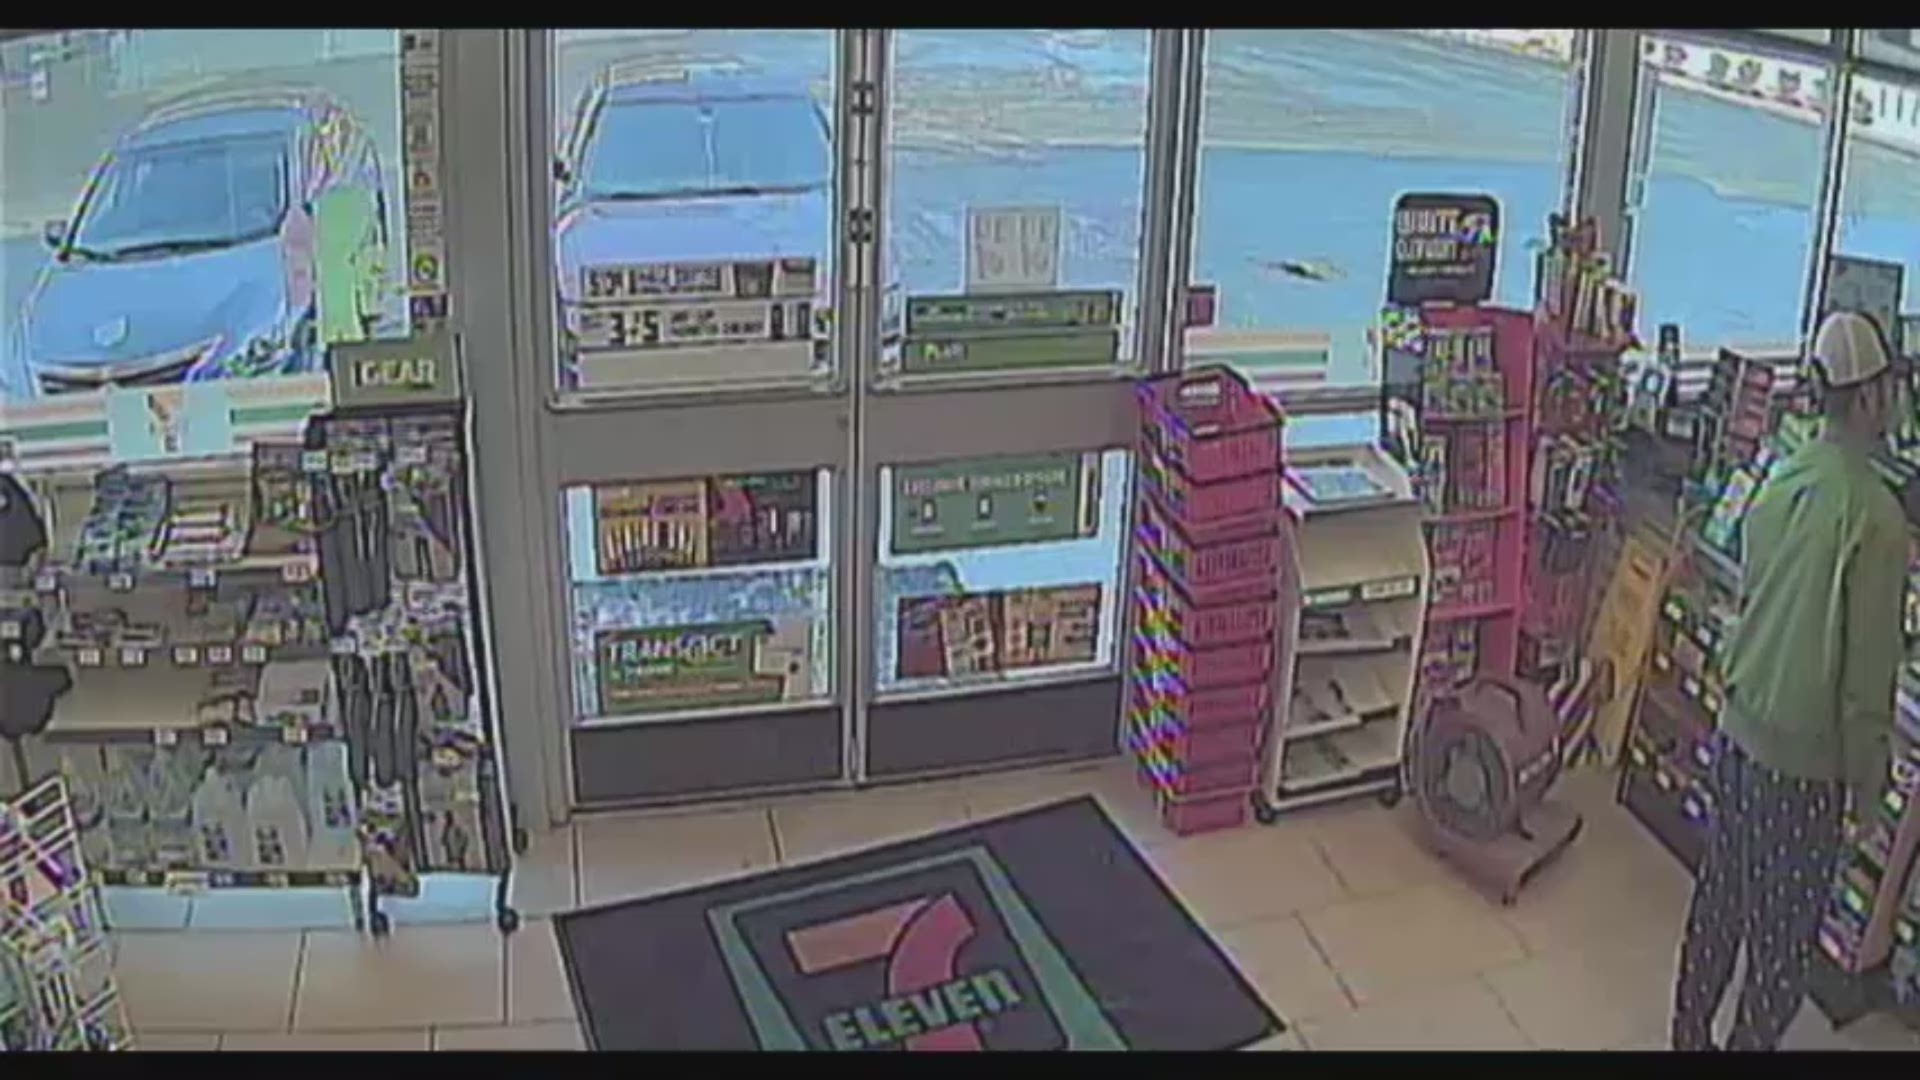 Surveillance video of a man in Newport News exposing himself at a 7-Eleven. Courtesy: Newport News Police Department